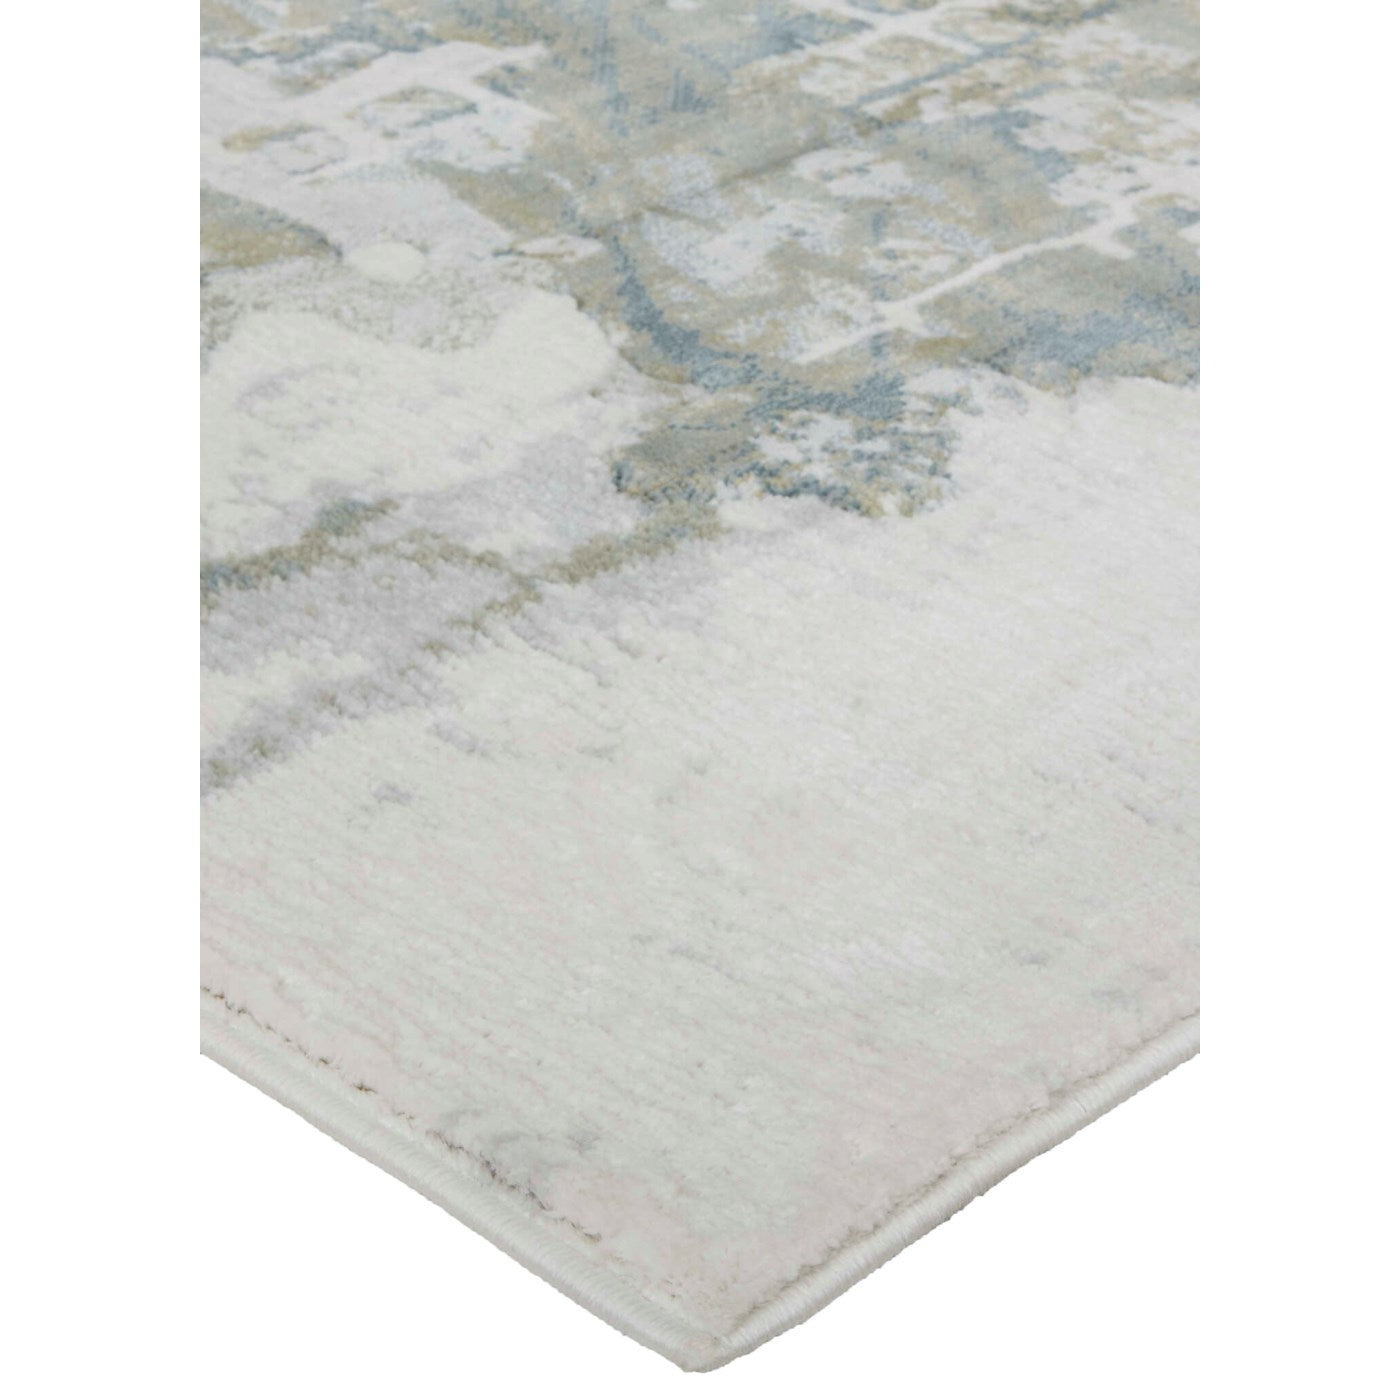 Atwell Silver Rug